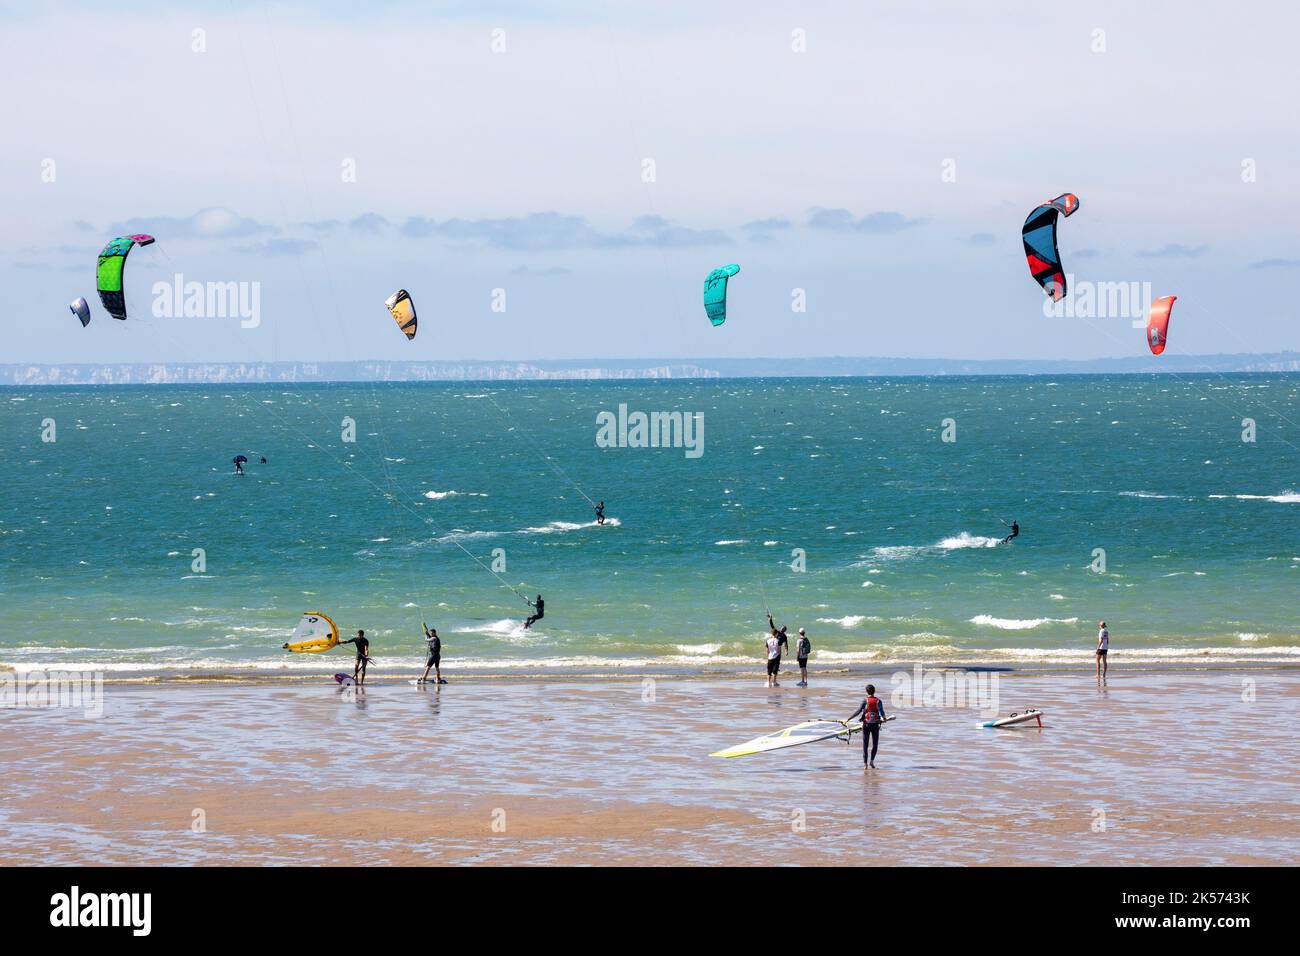 France, Pas de Calais, Wissant, kitesurfing and windsurfing, view of the English coast in the background Stock Photo